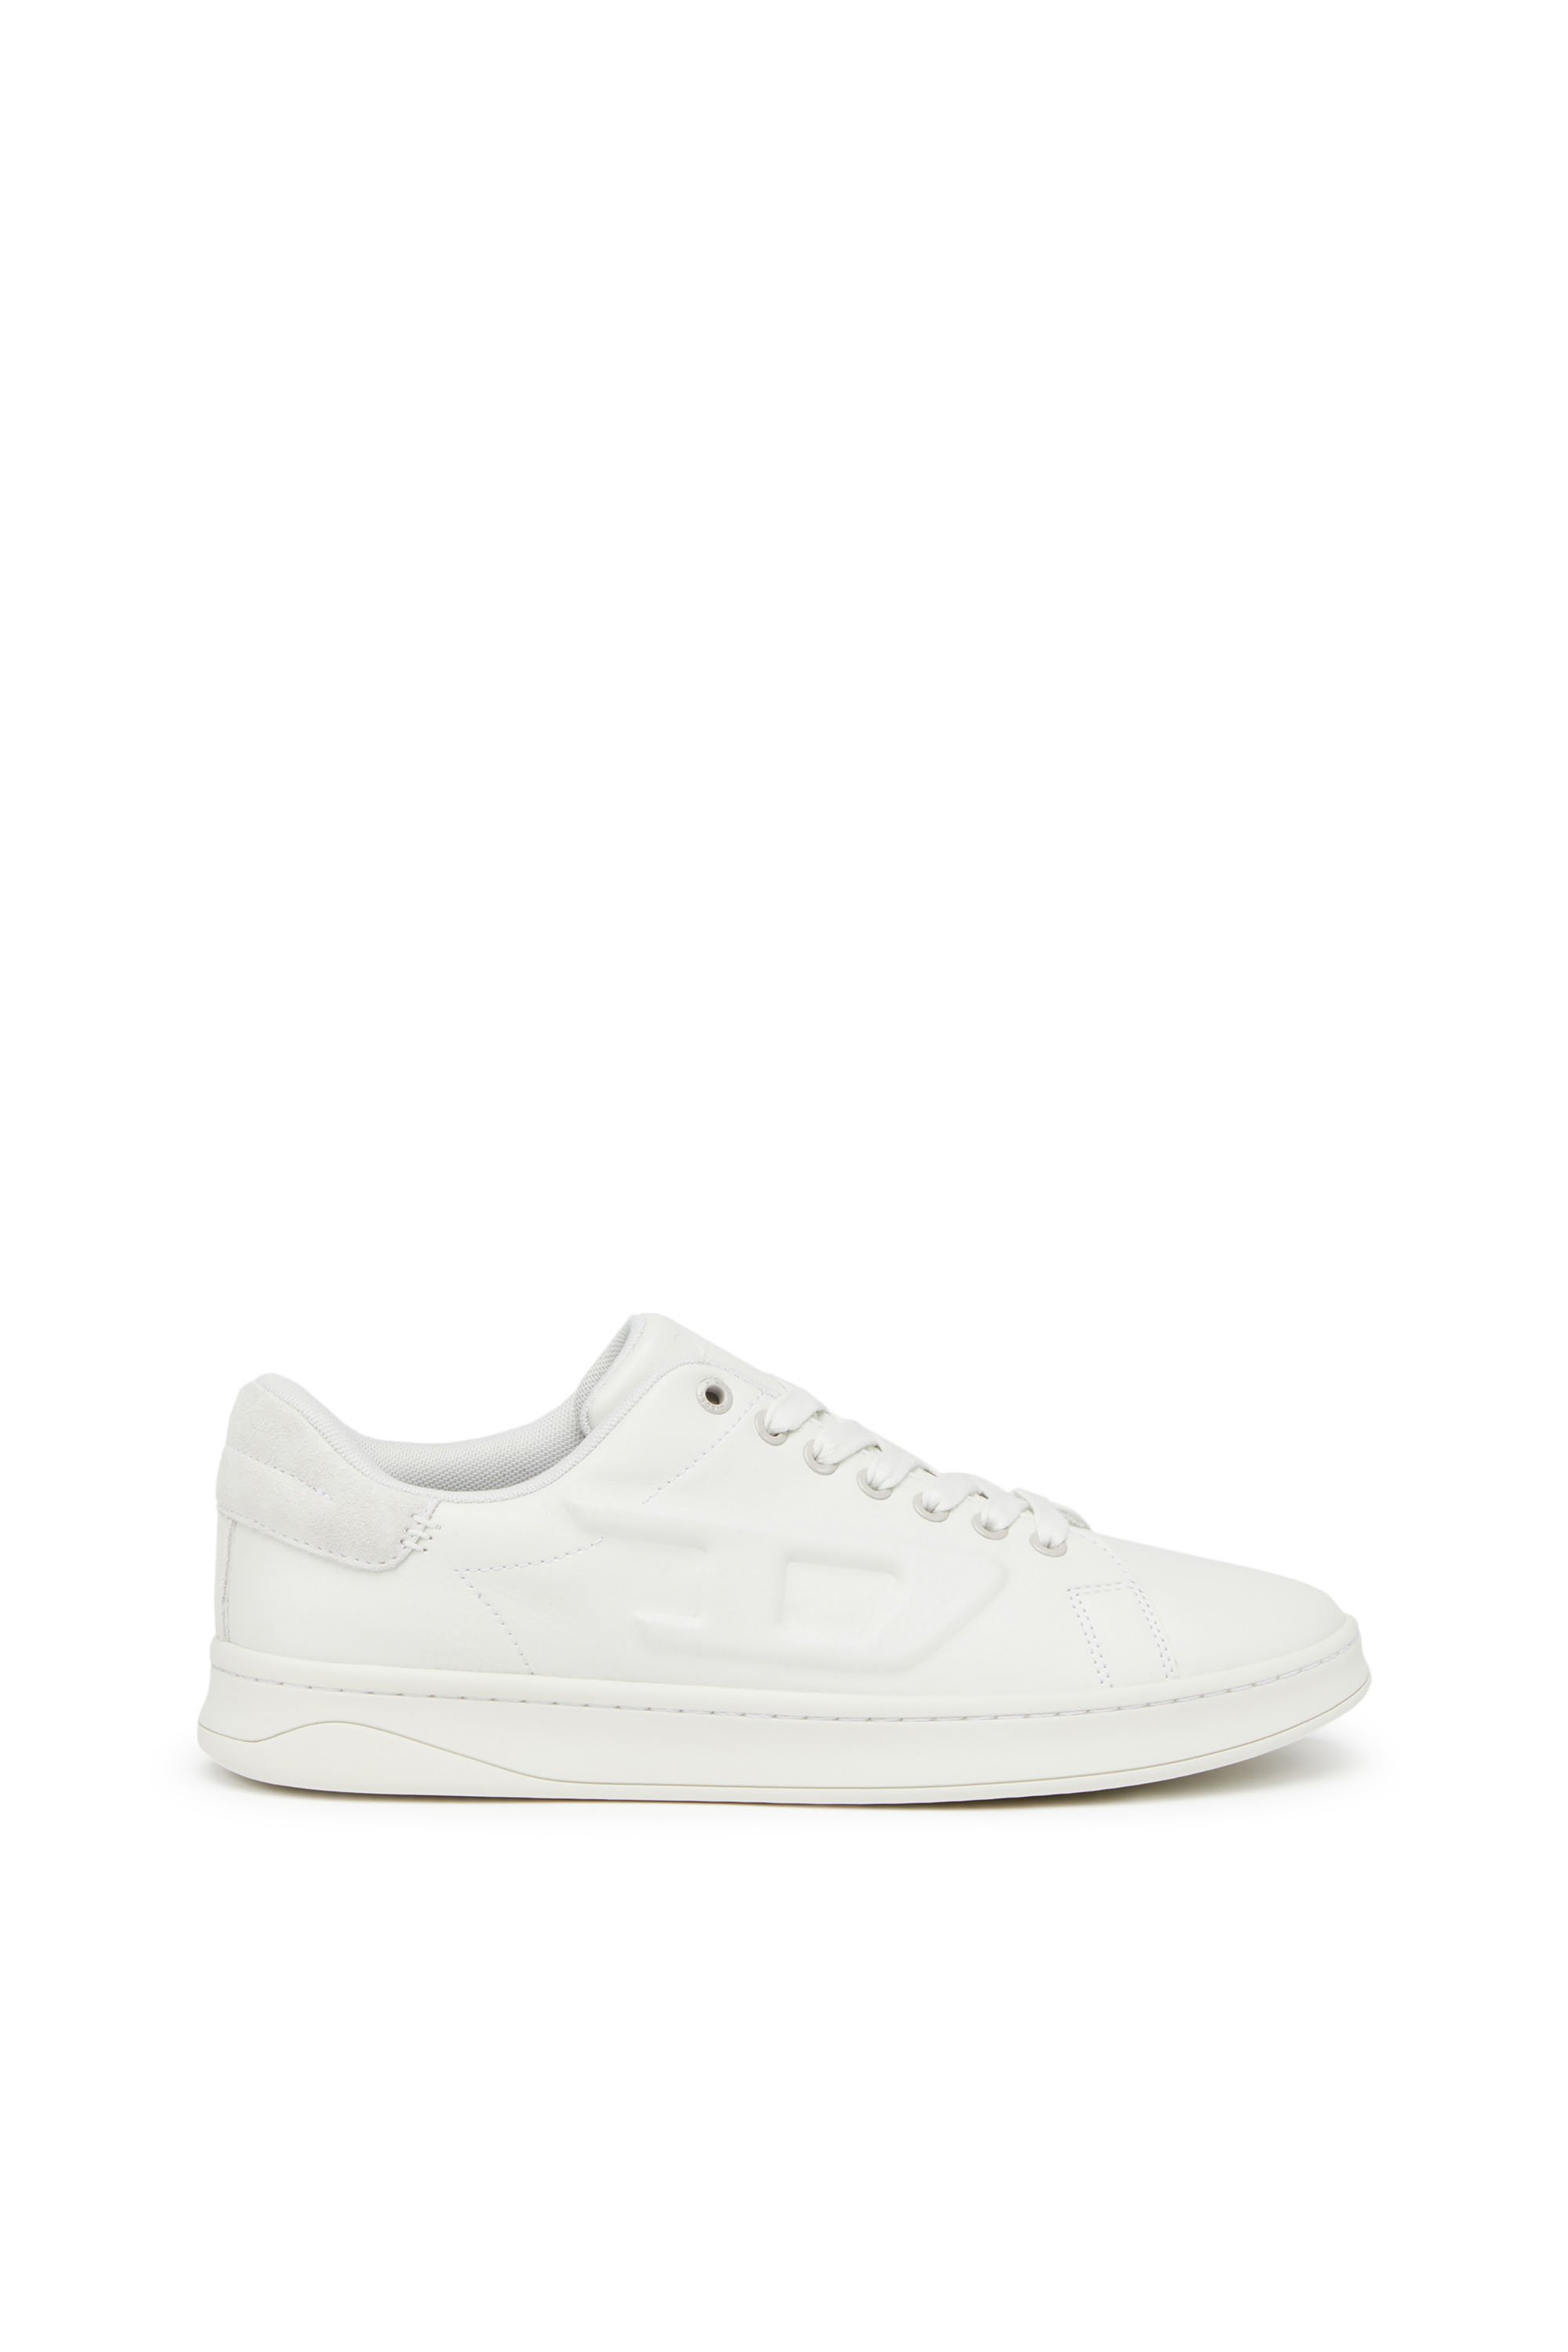 Diesel - S-Athene Low W - Sneakers with embossed D logo - Sneakers - Woman - White